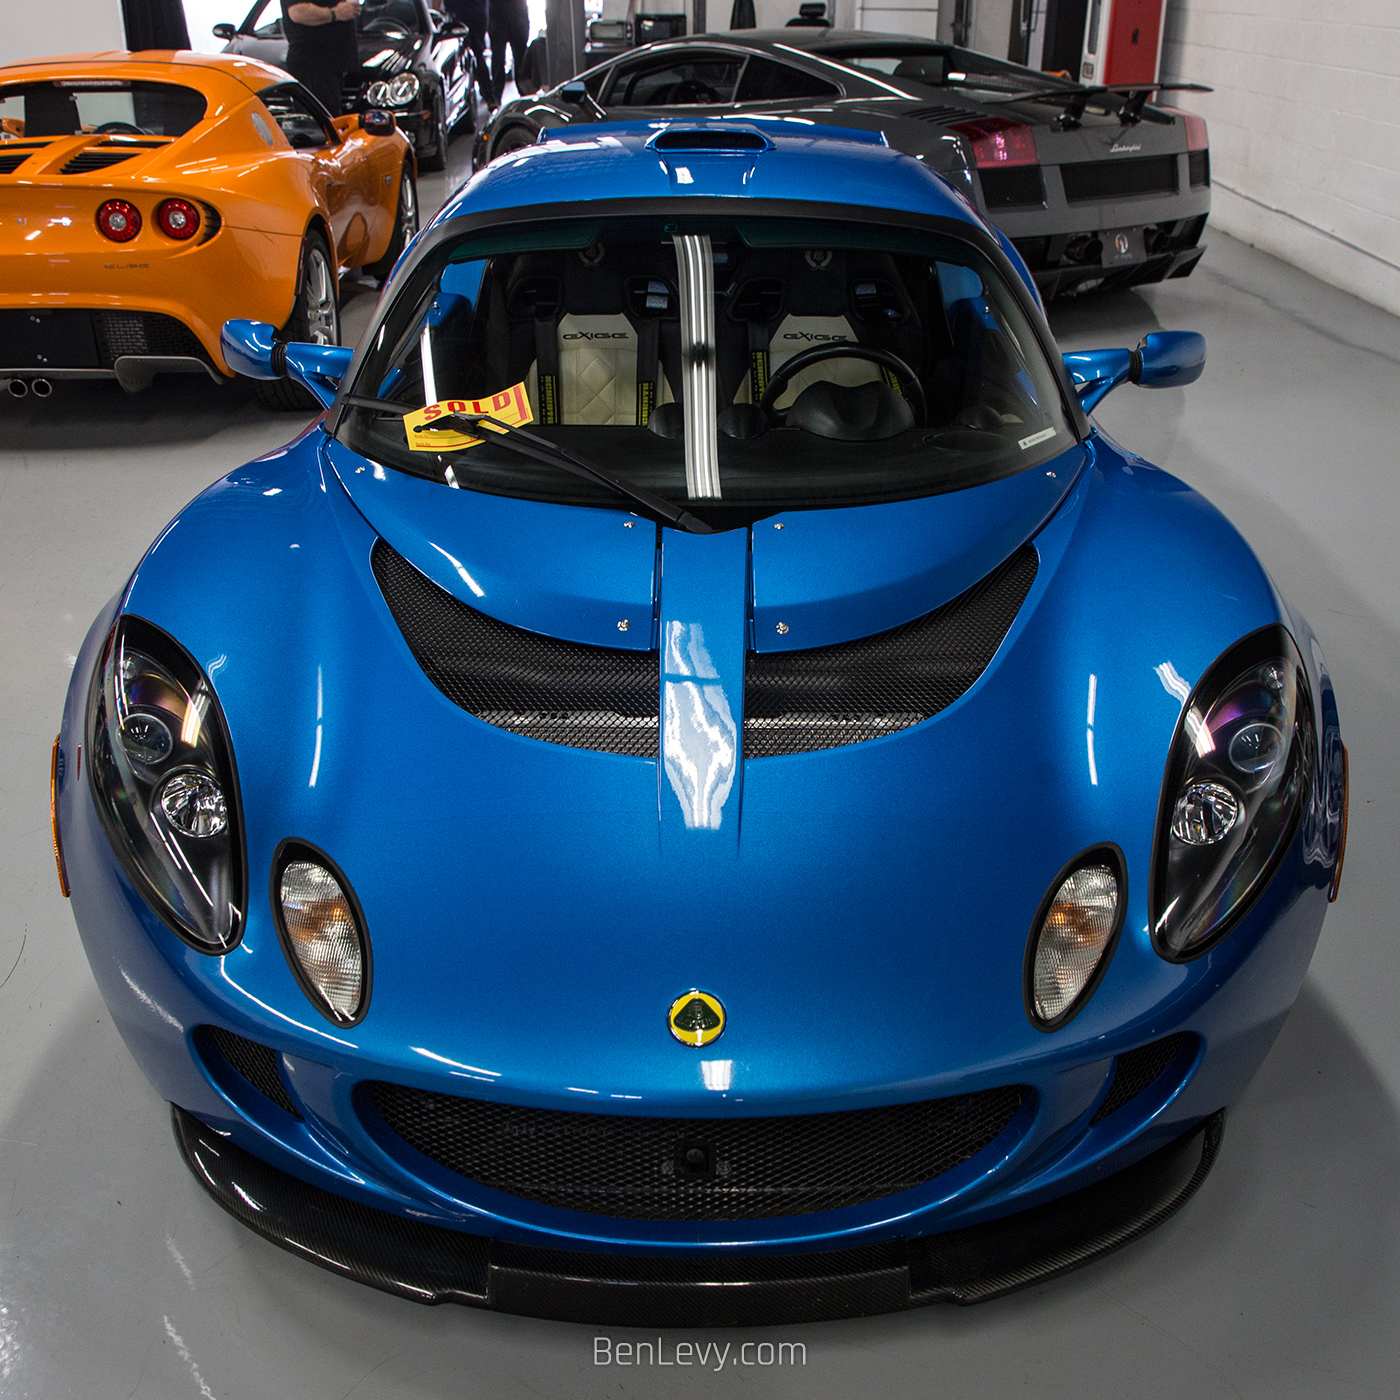 Front Clamshell of a Blue Lotus Exige